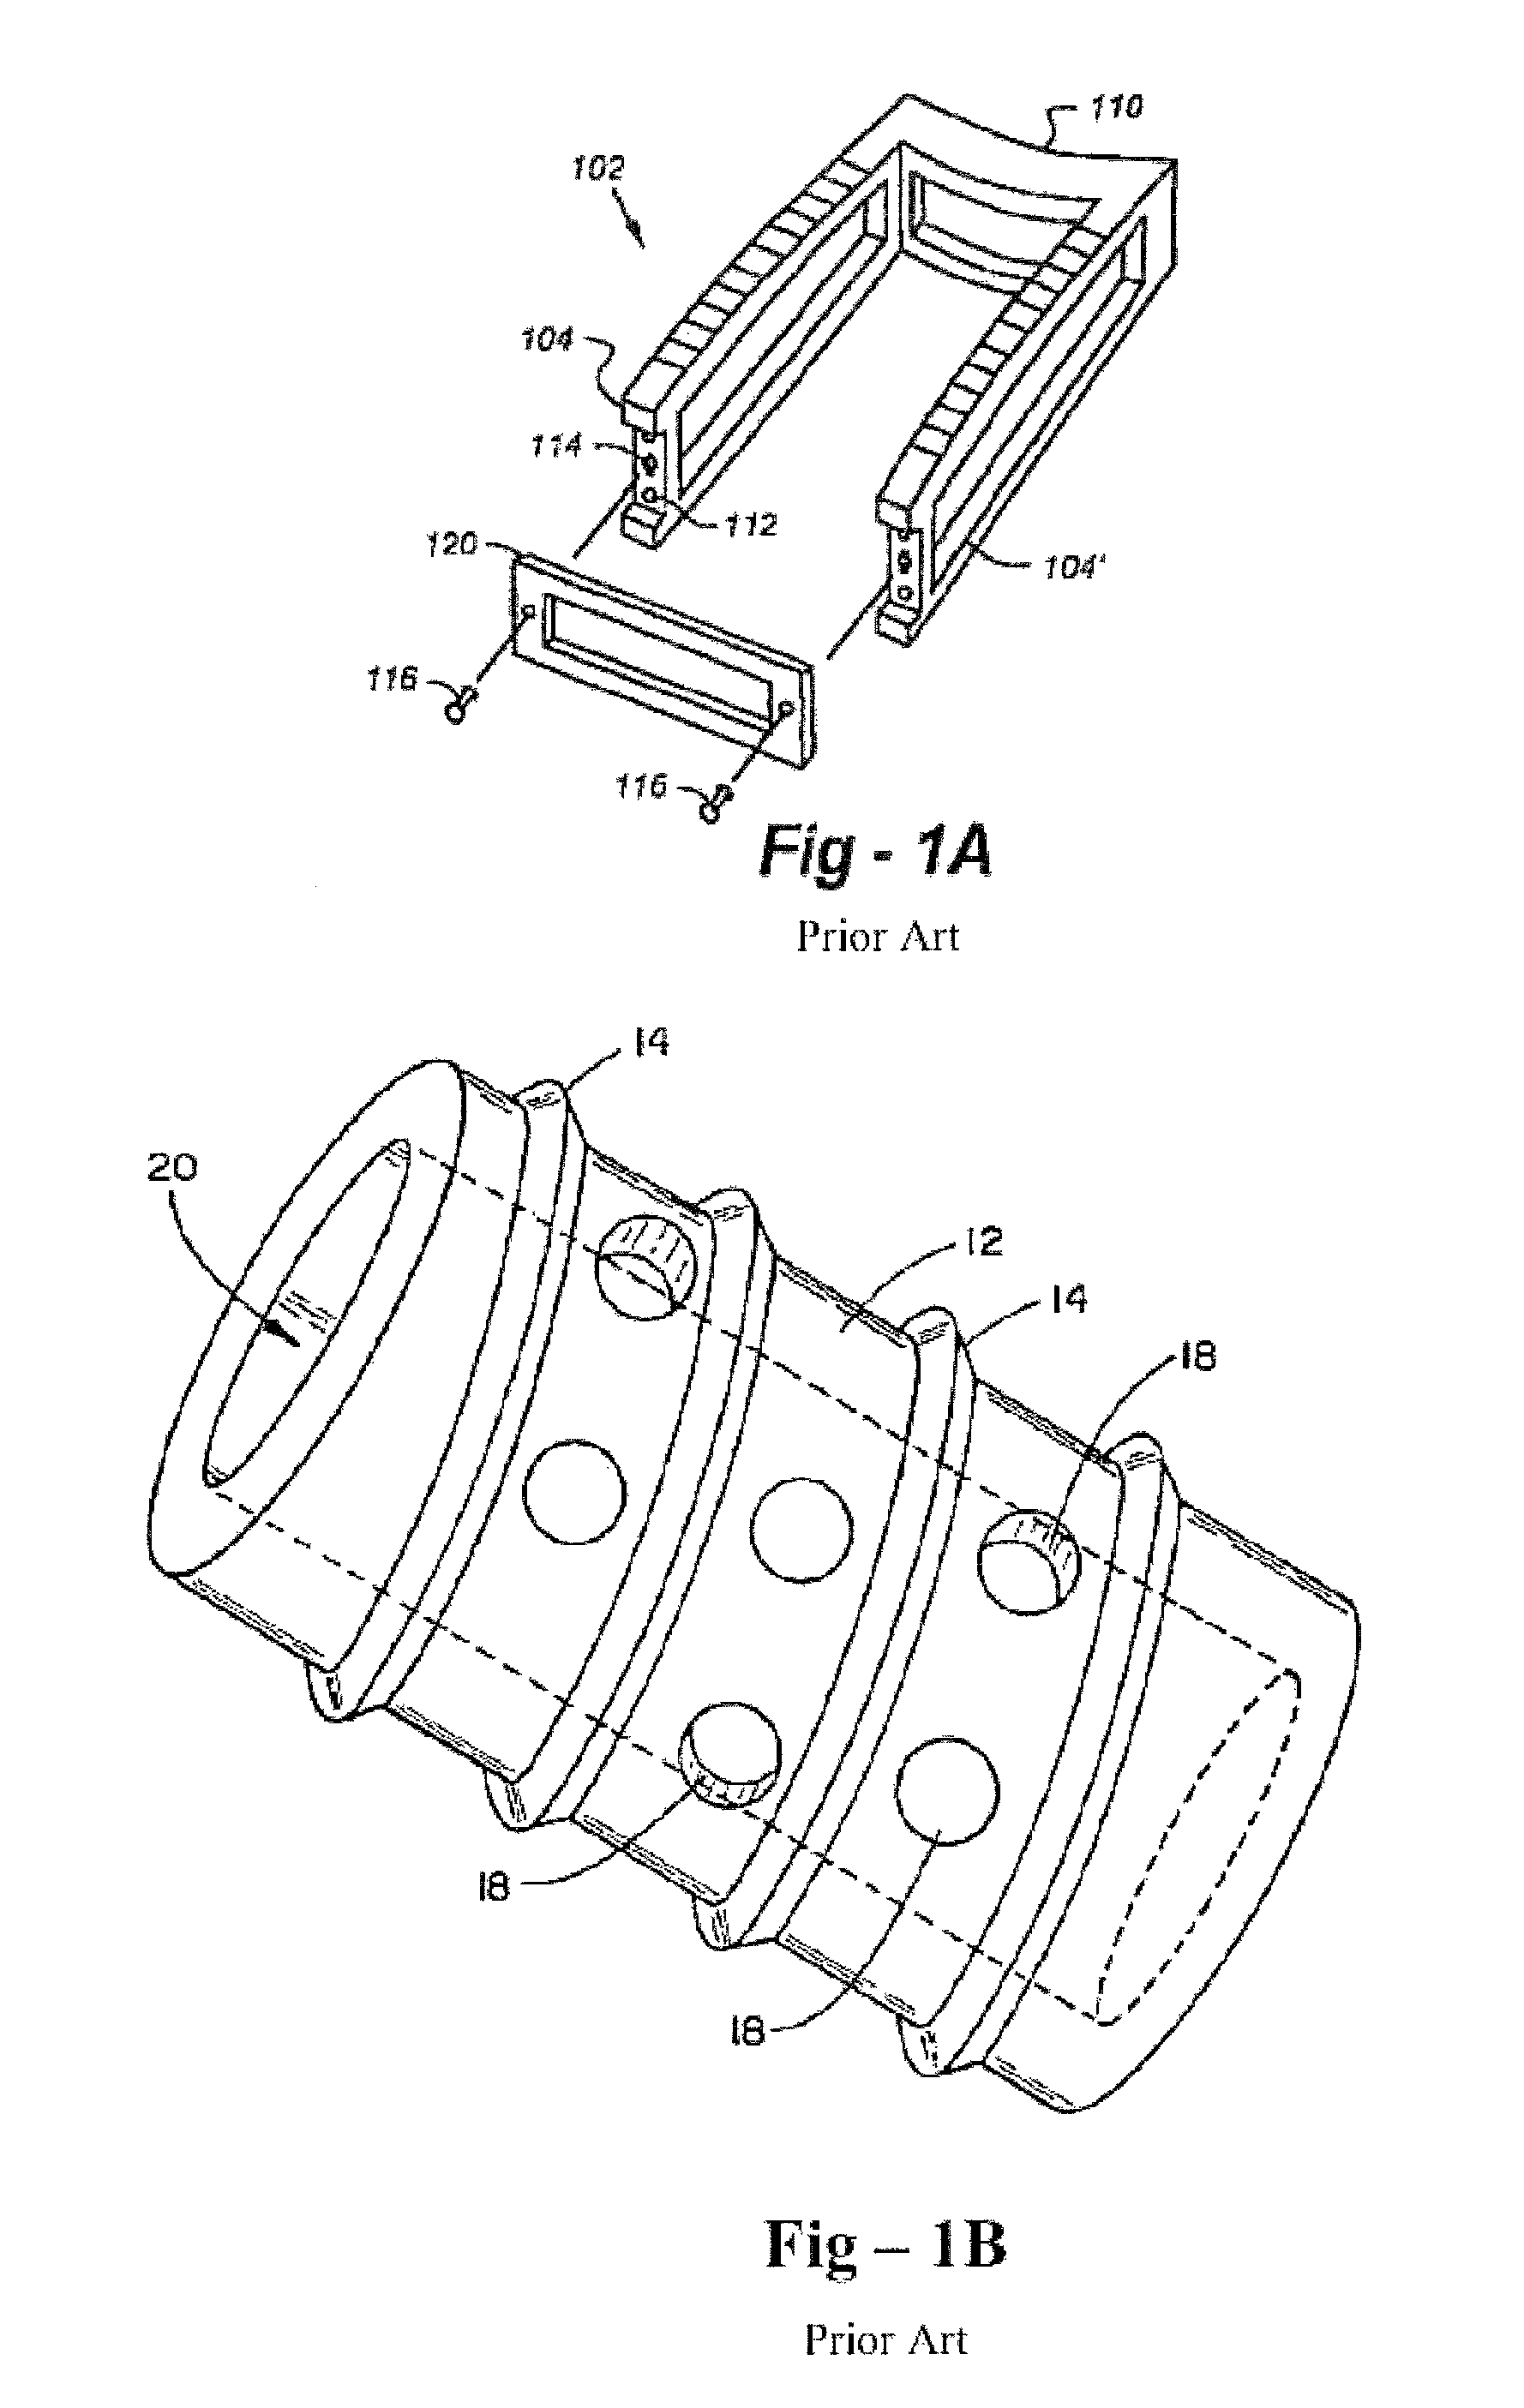 Tools and methods for spinal fusion